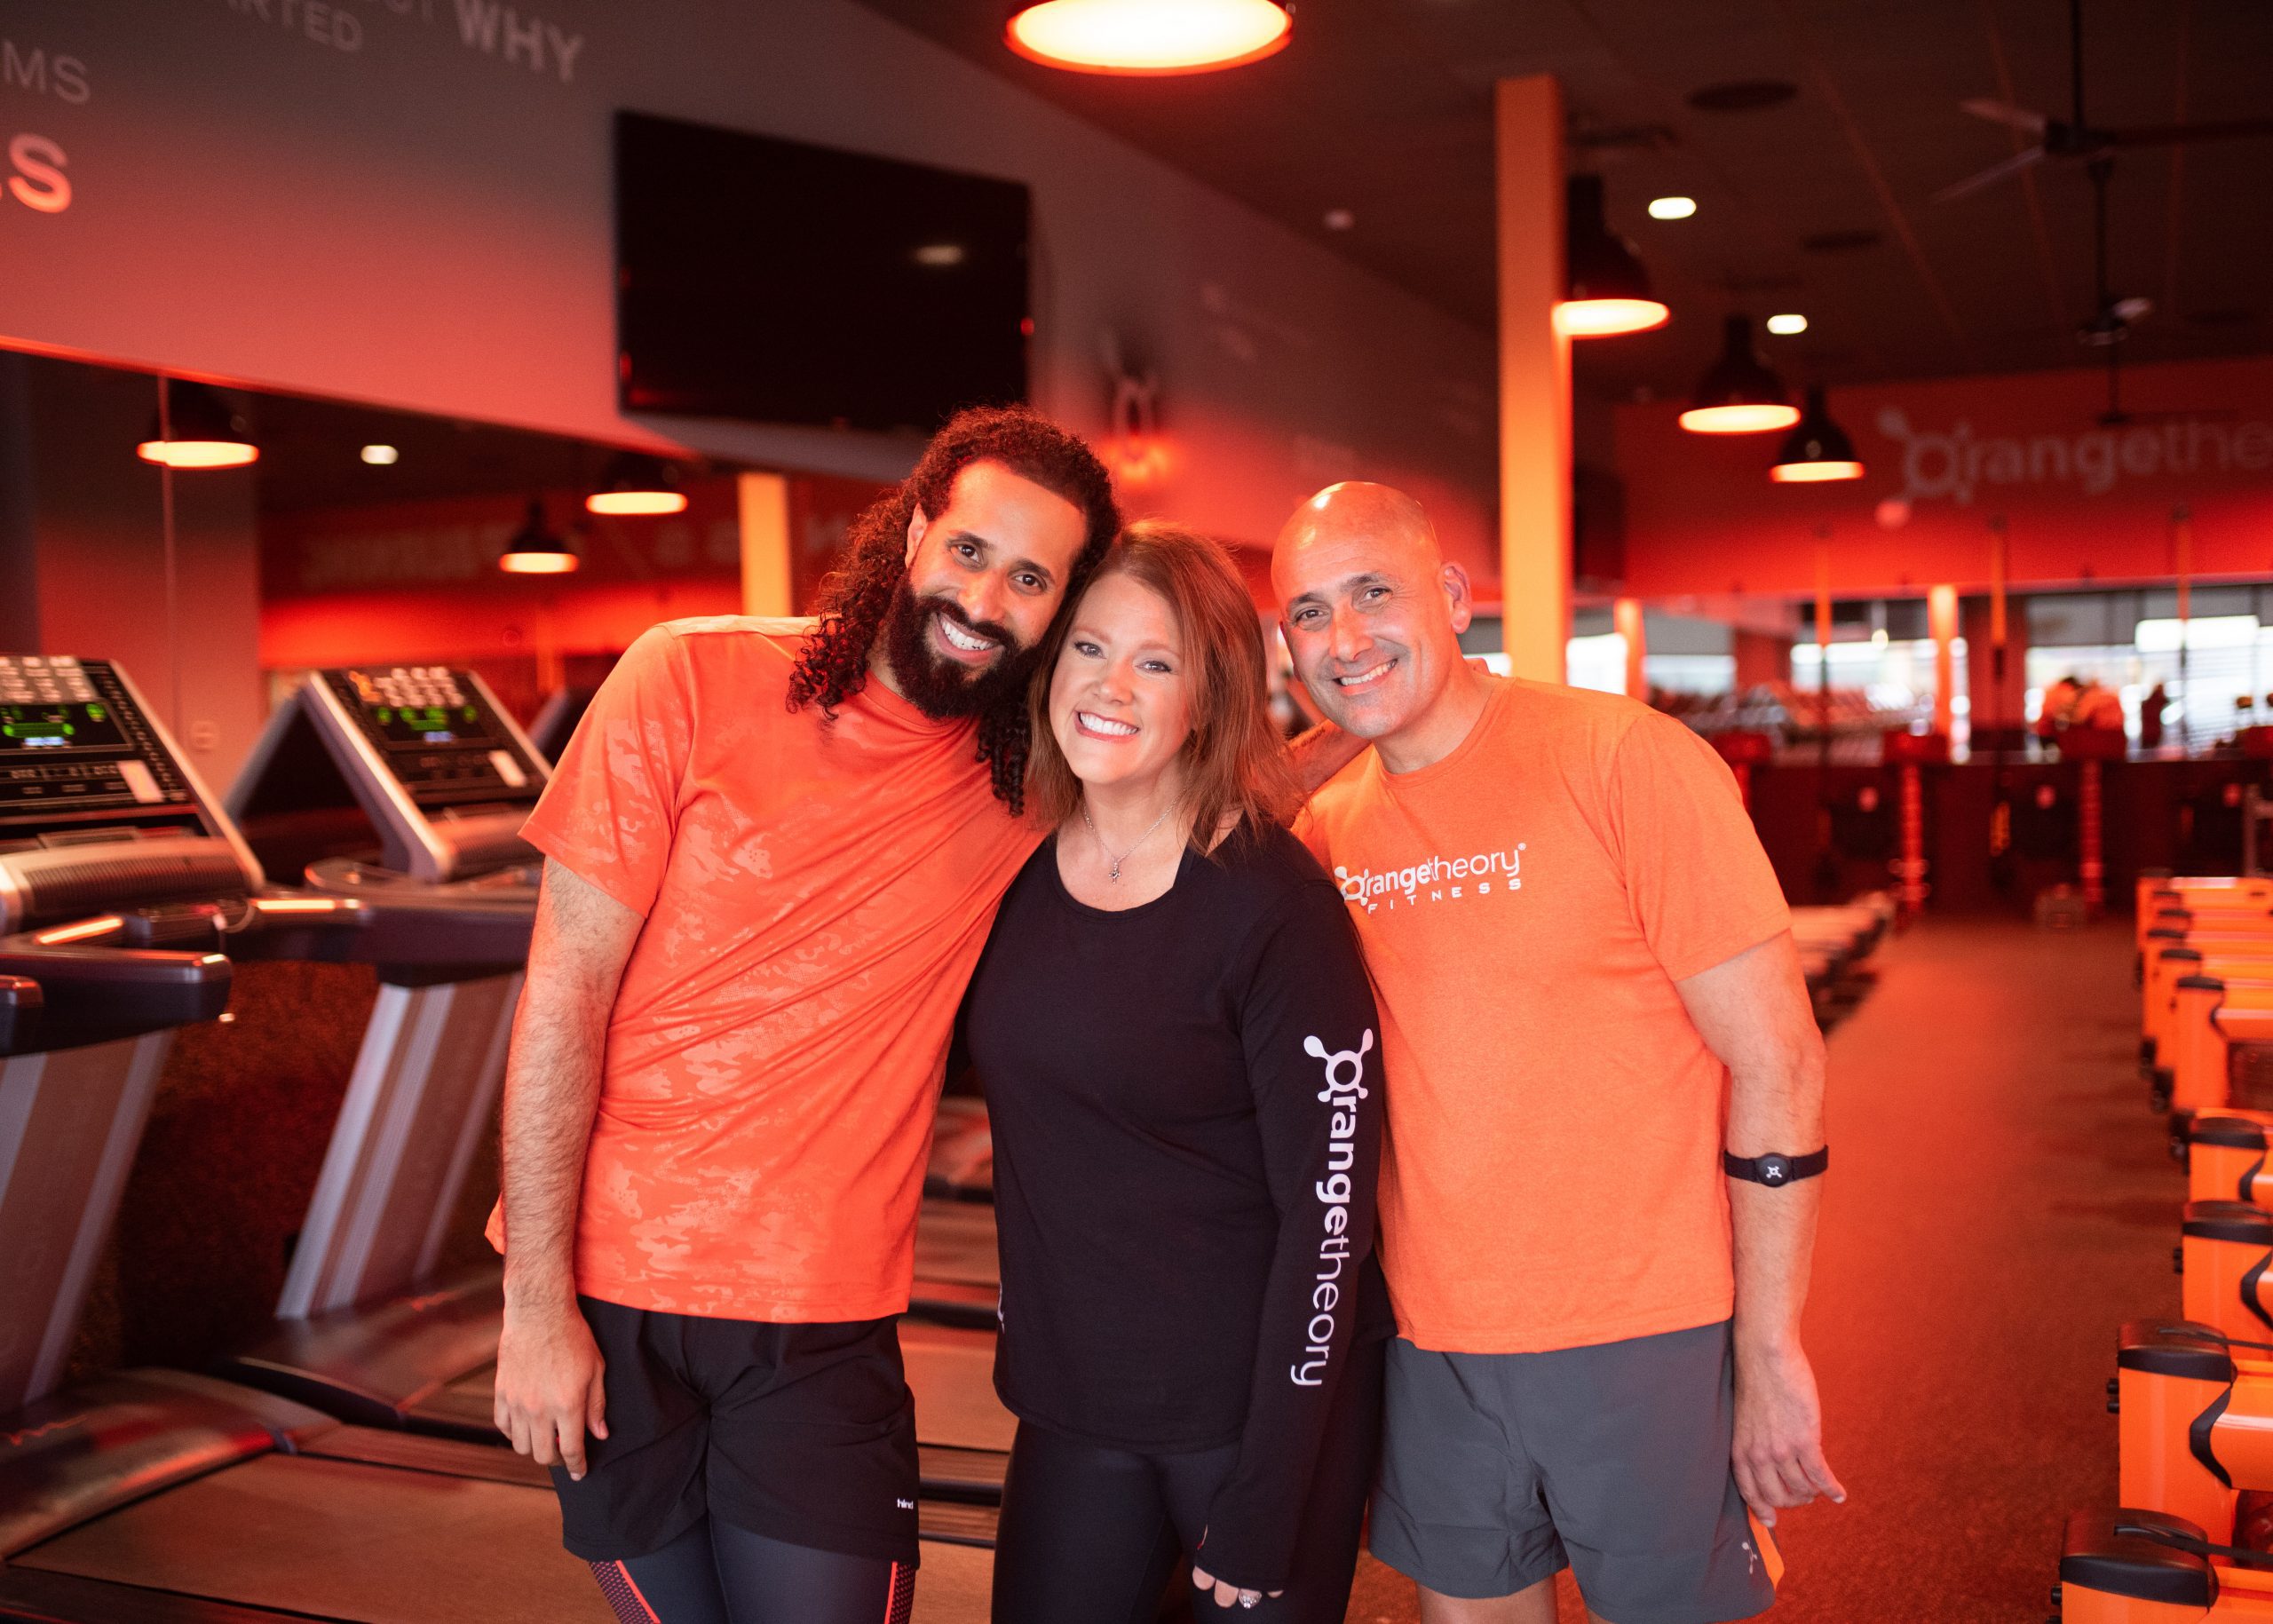 Get Fit And Energized With Orangetheory